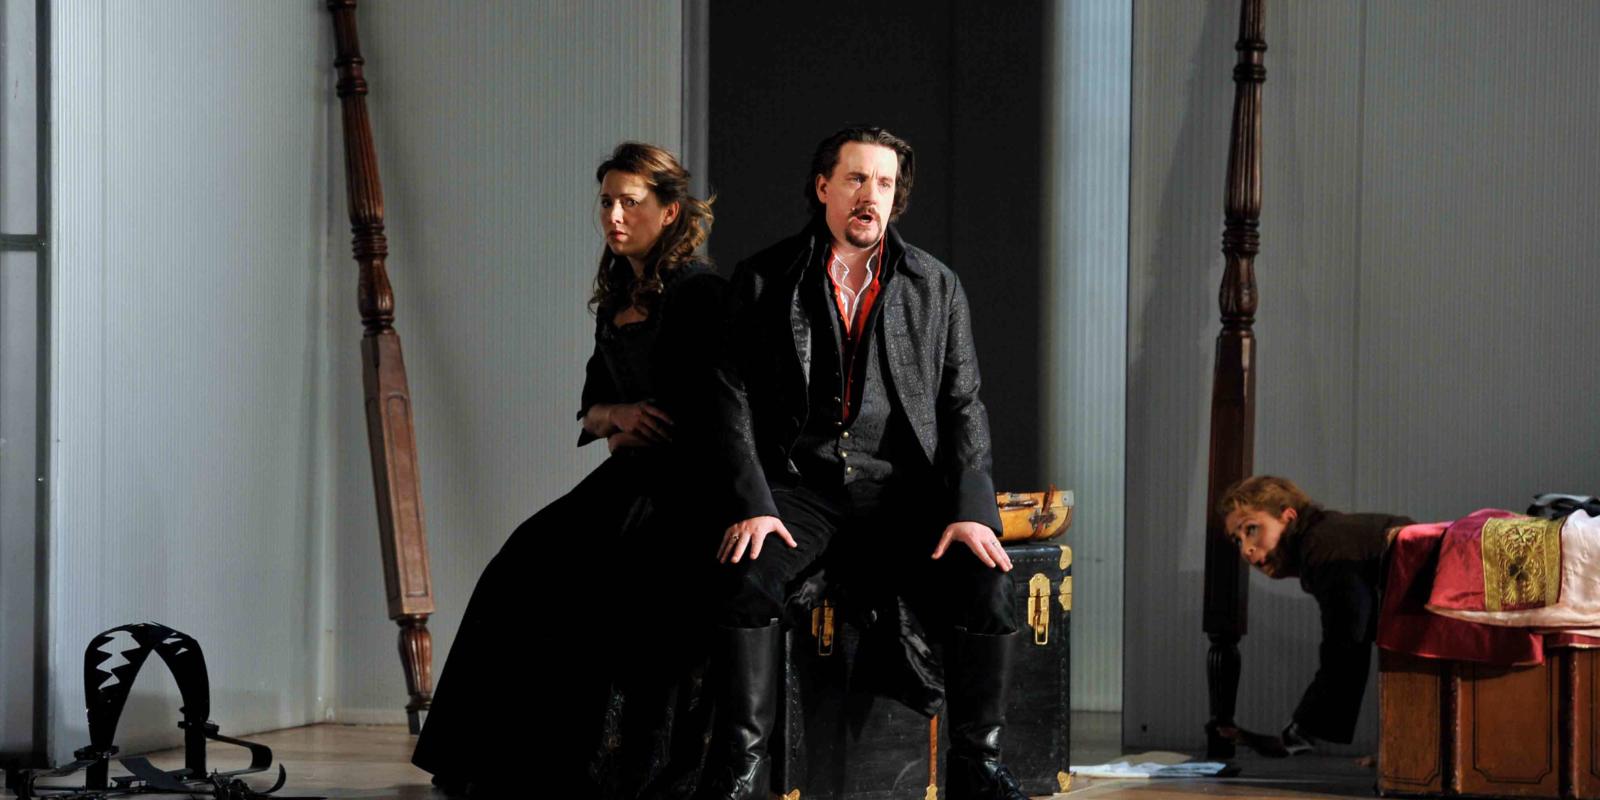 An image of Mary Bevan and Benedict Nelson in Fiona Shaw's 2014 production of The Marriage of Figaro